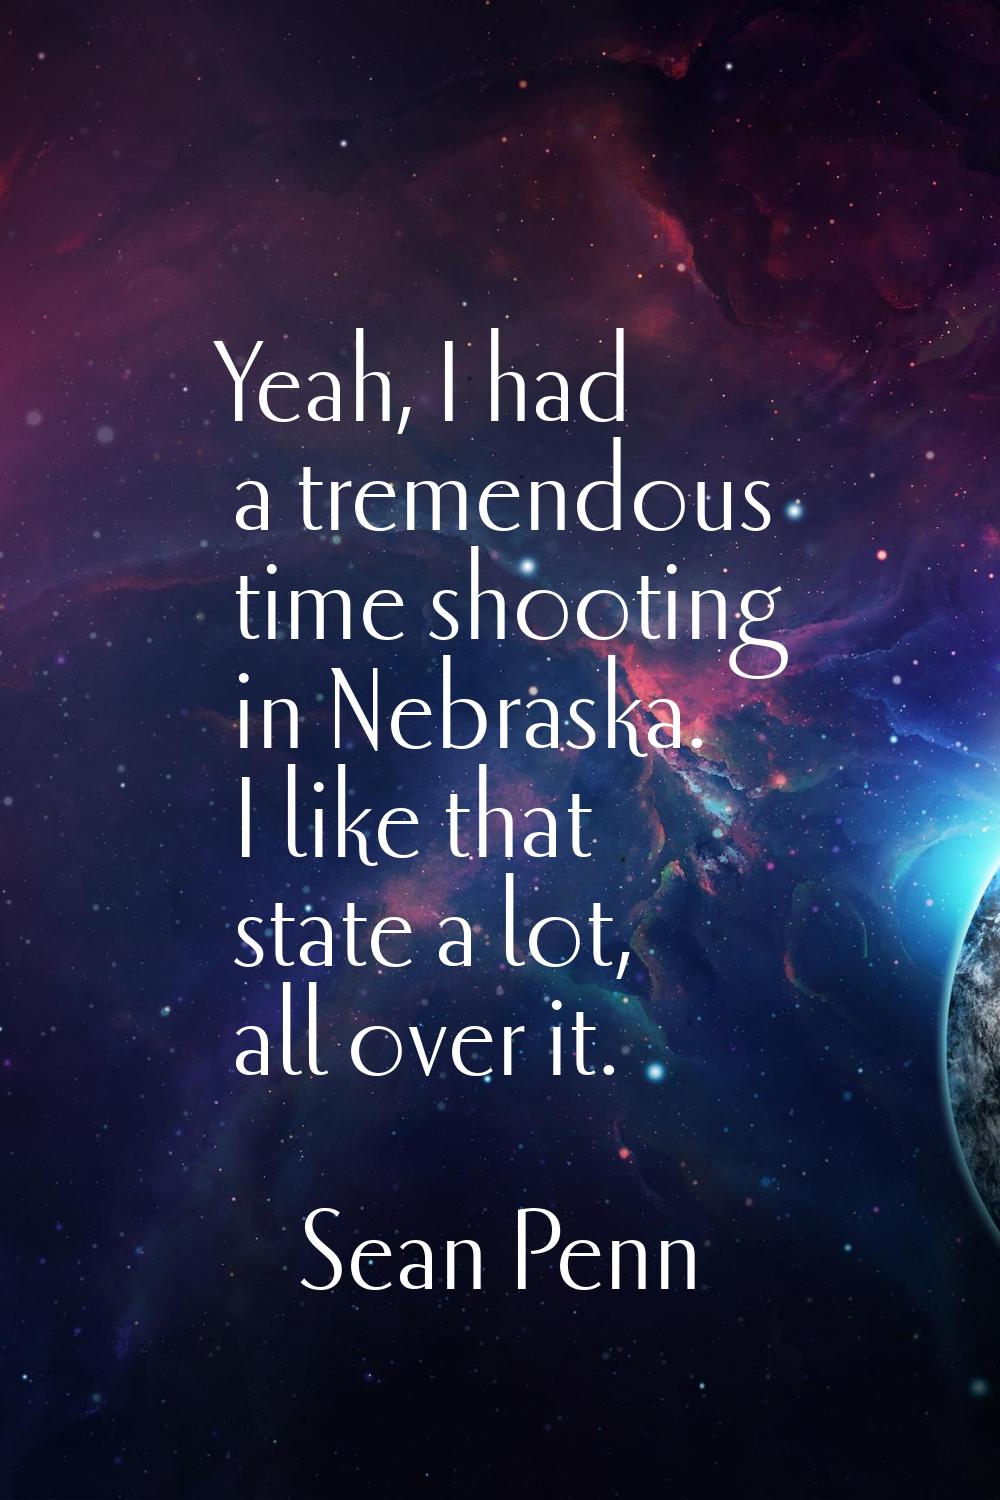 Yeah, I had a tremendous time shooting in Nebraska. I like that state a lot, all over it.